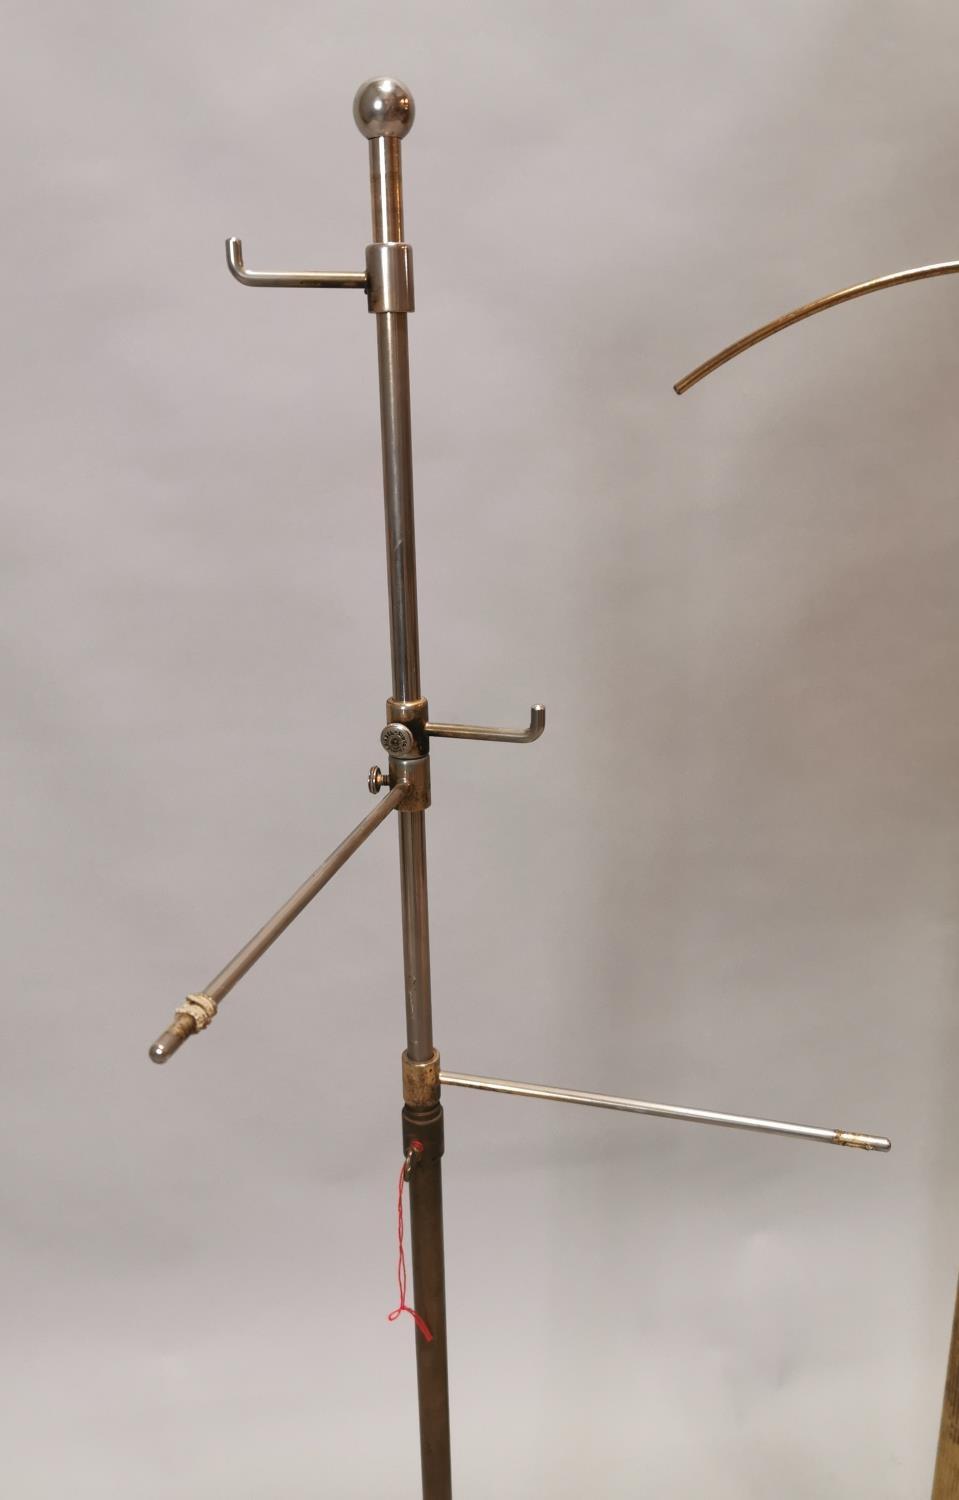 Two early 20th C. brass haberdashery shop hat stands - Image 7 of 8